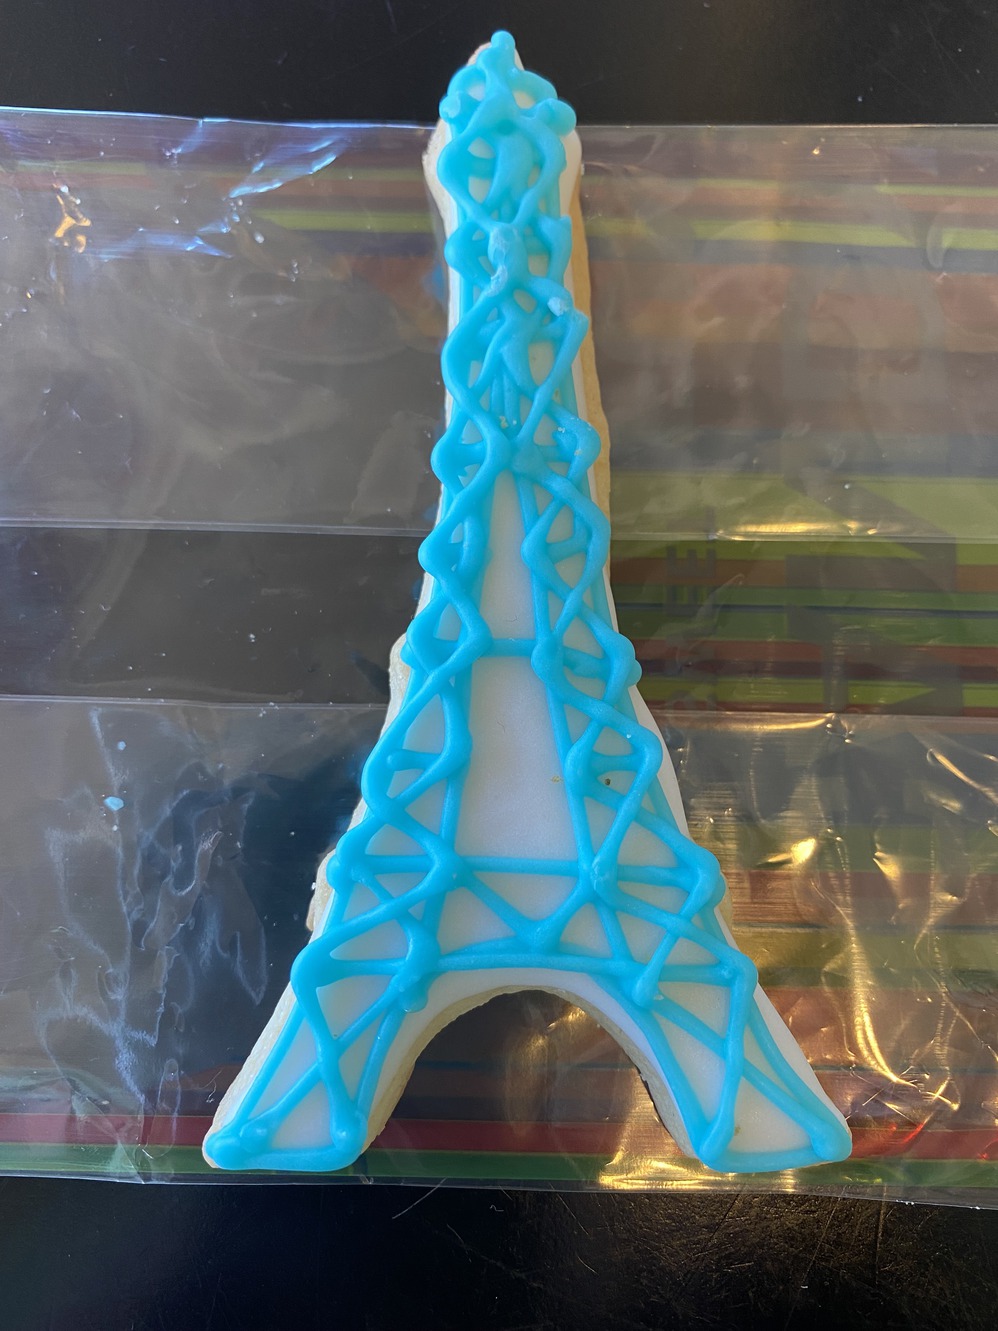 This is the Eiffel Tower commemorative cookie.